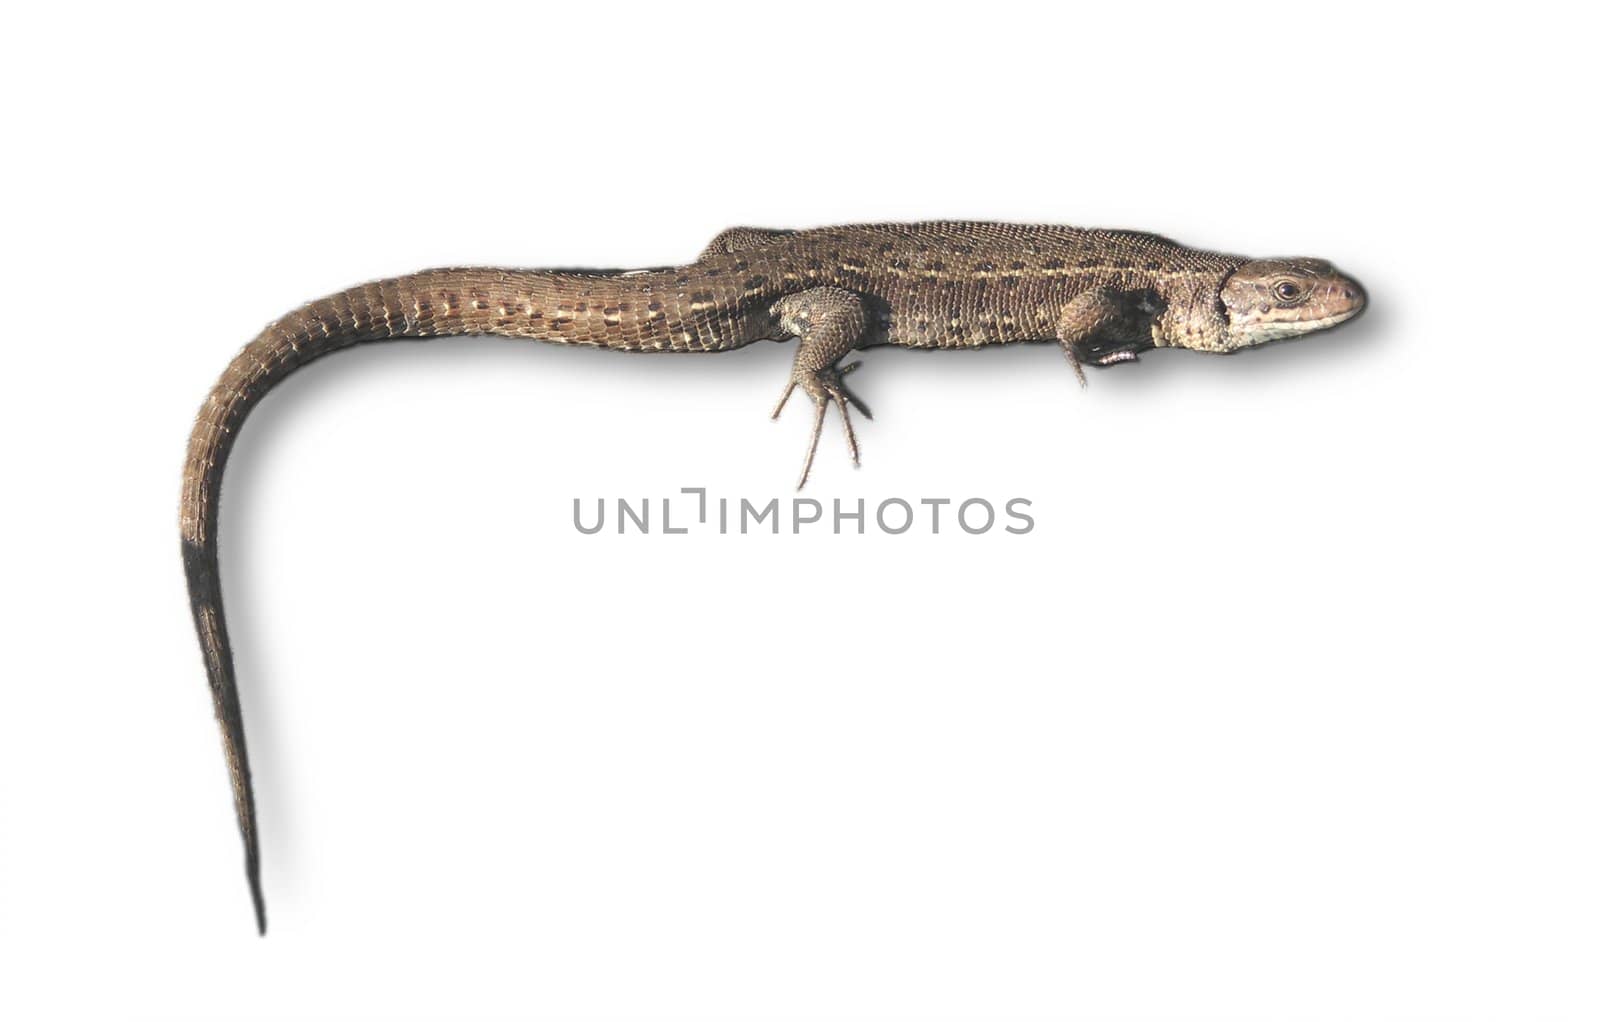 The lizard isolated on white